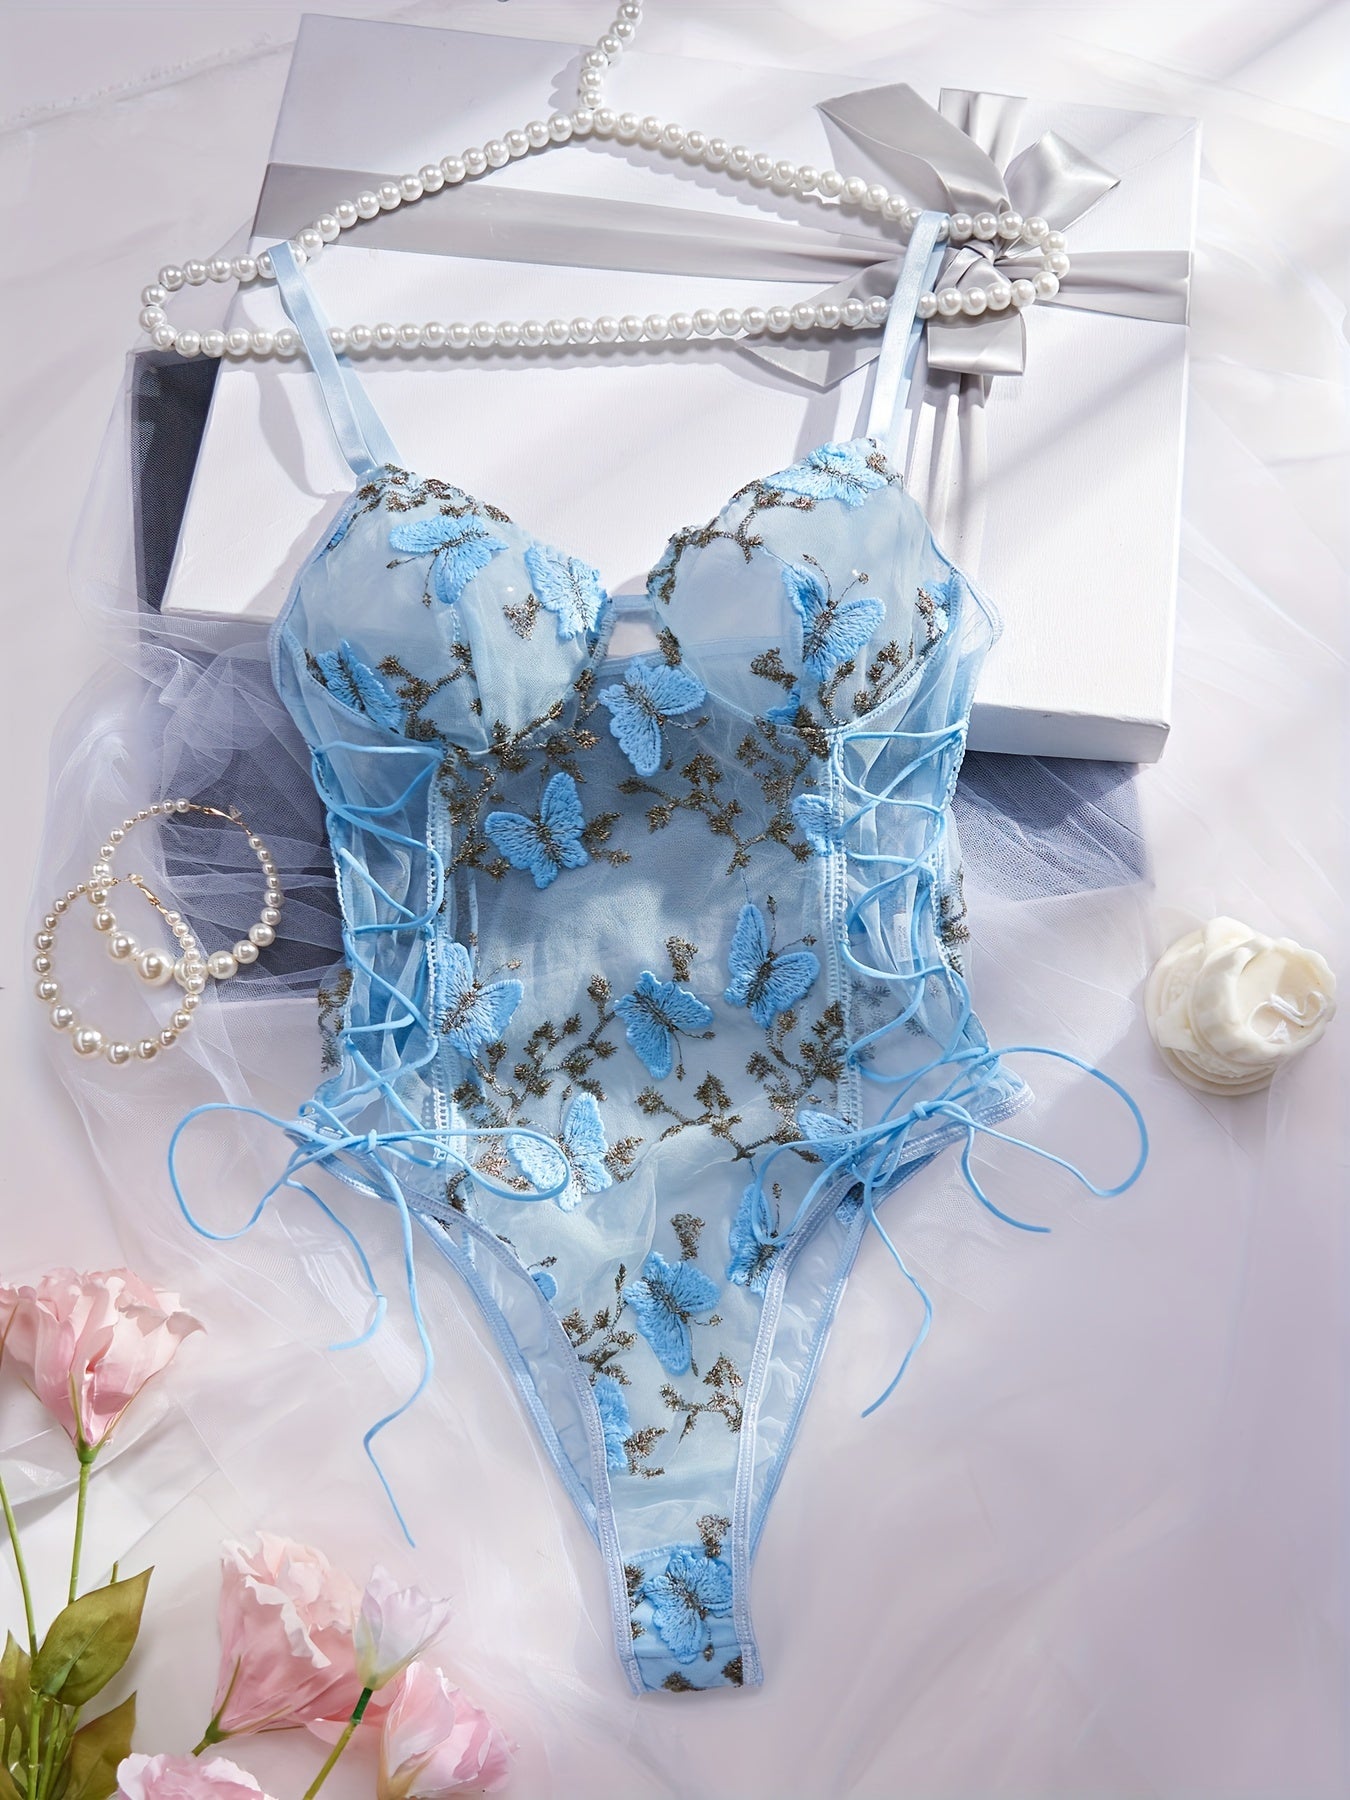 2 Alluring Colors, Sizes S-XL Womens Seductive One-piece Lingerie - Intricate Butterfly Embroidery, Luxurious Soft Tulle, Adjustable Straps - Sexy Adult Underwear for A ravishing Look